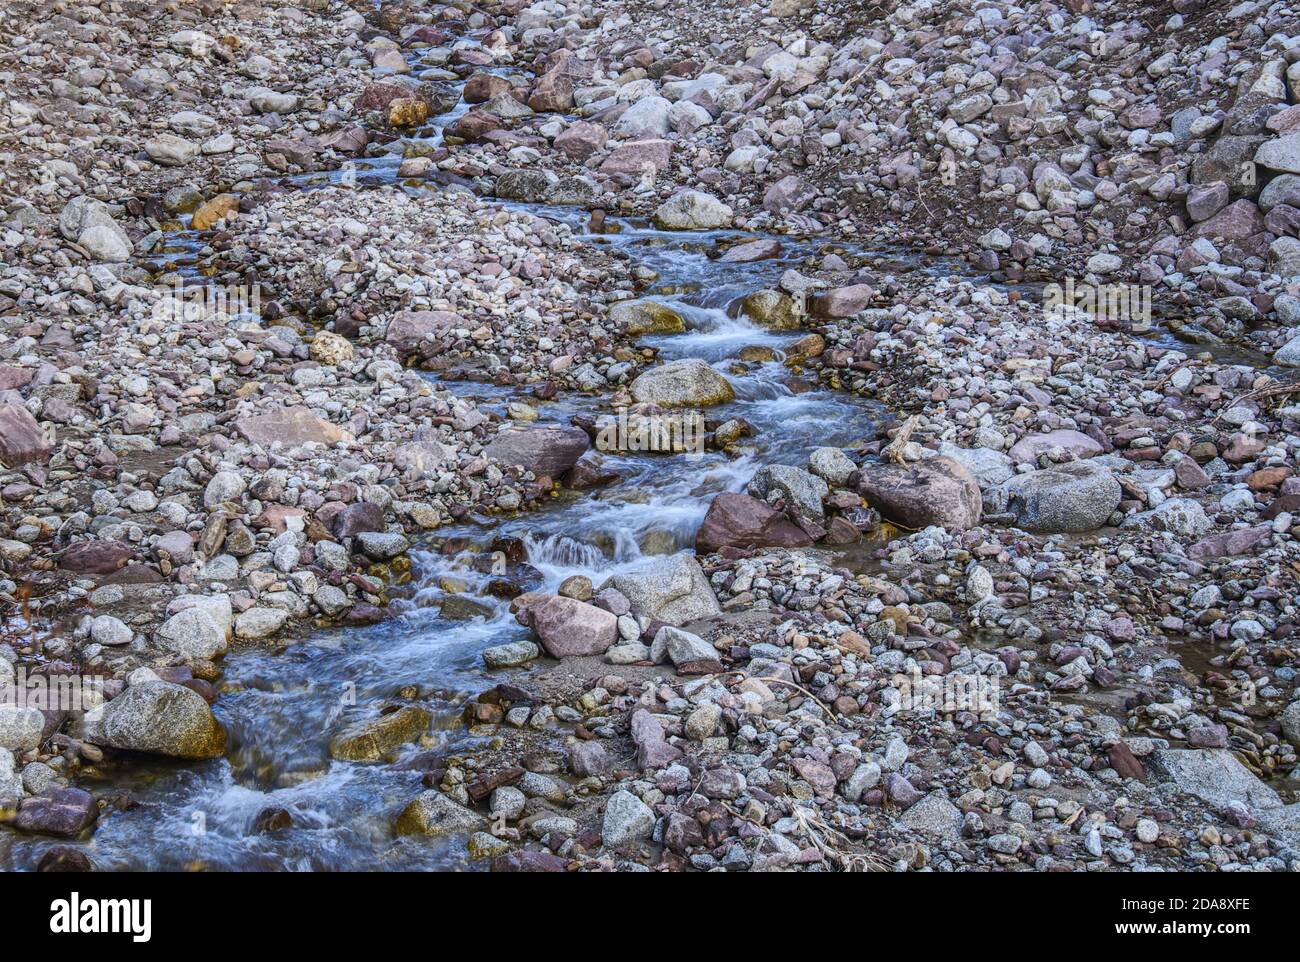 Colourful image of a small river, water flowing between the stones in Italian Alps. Stock Photo